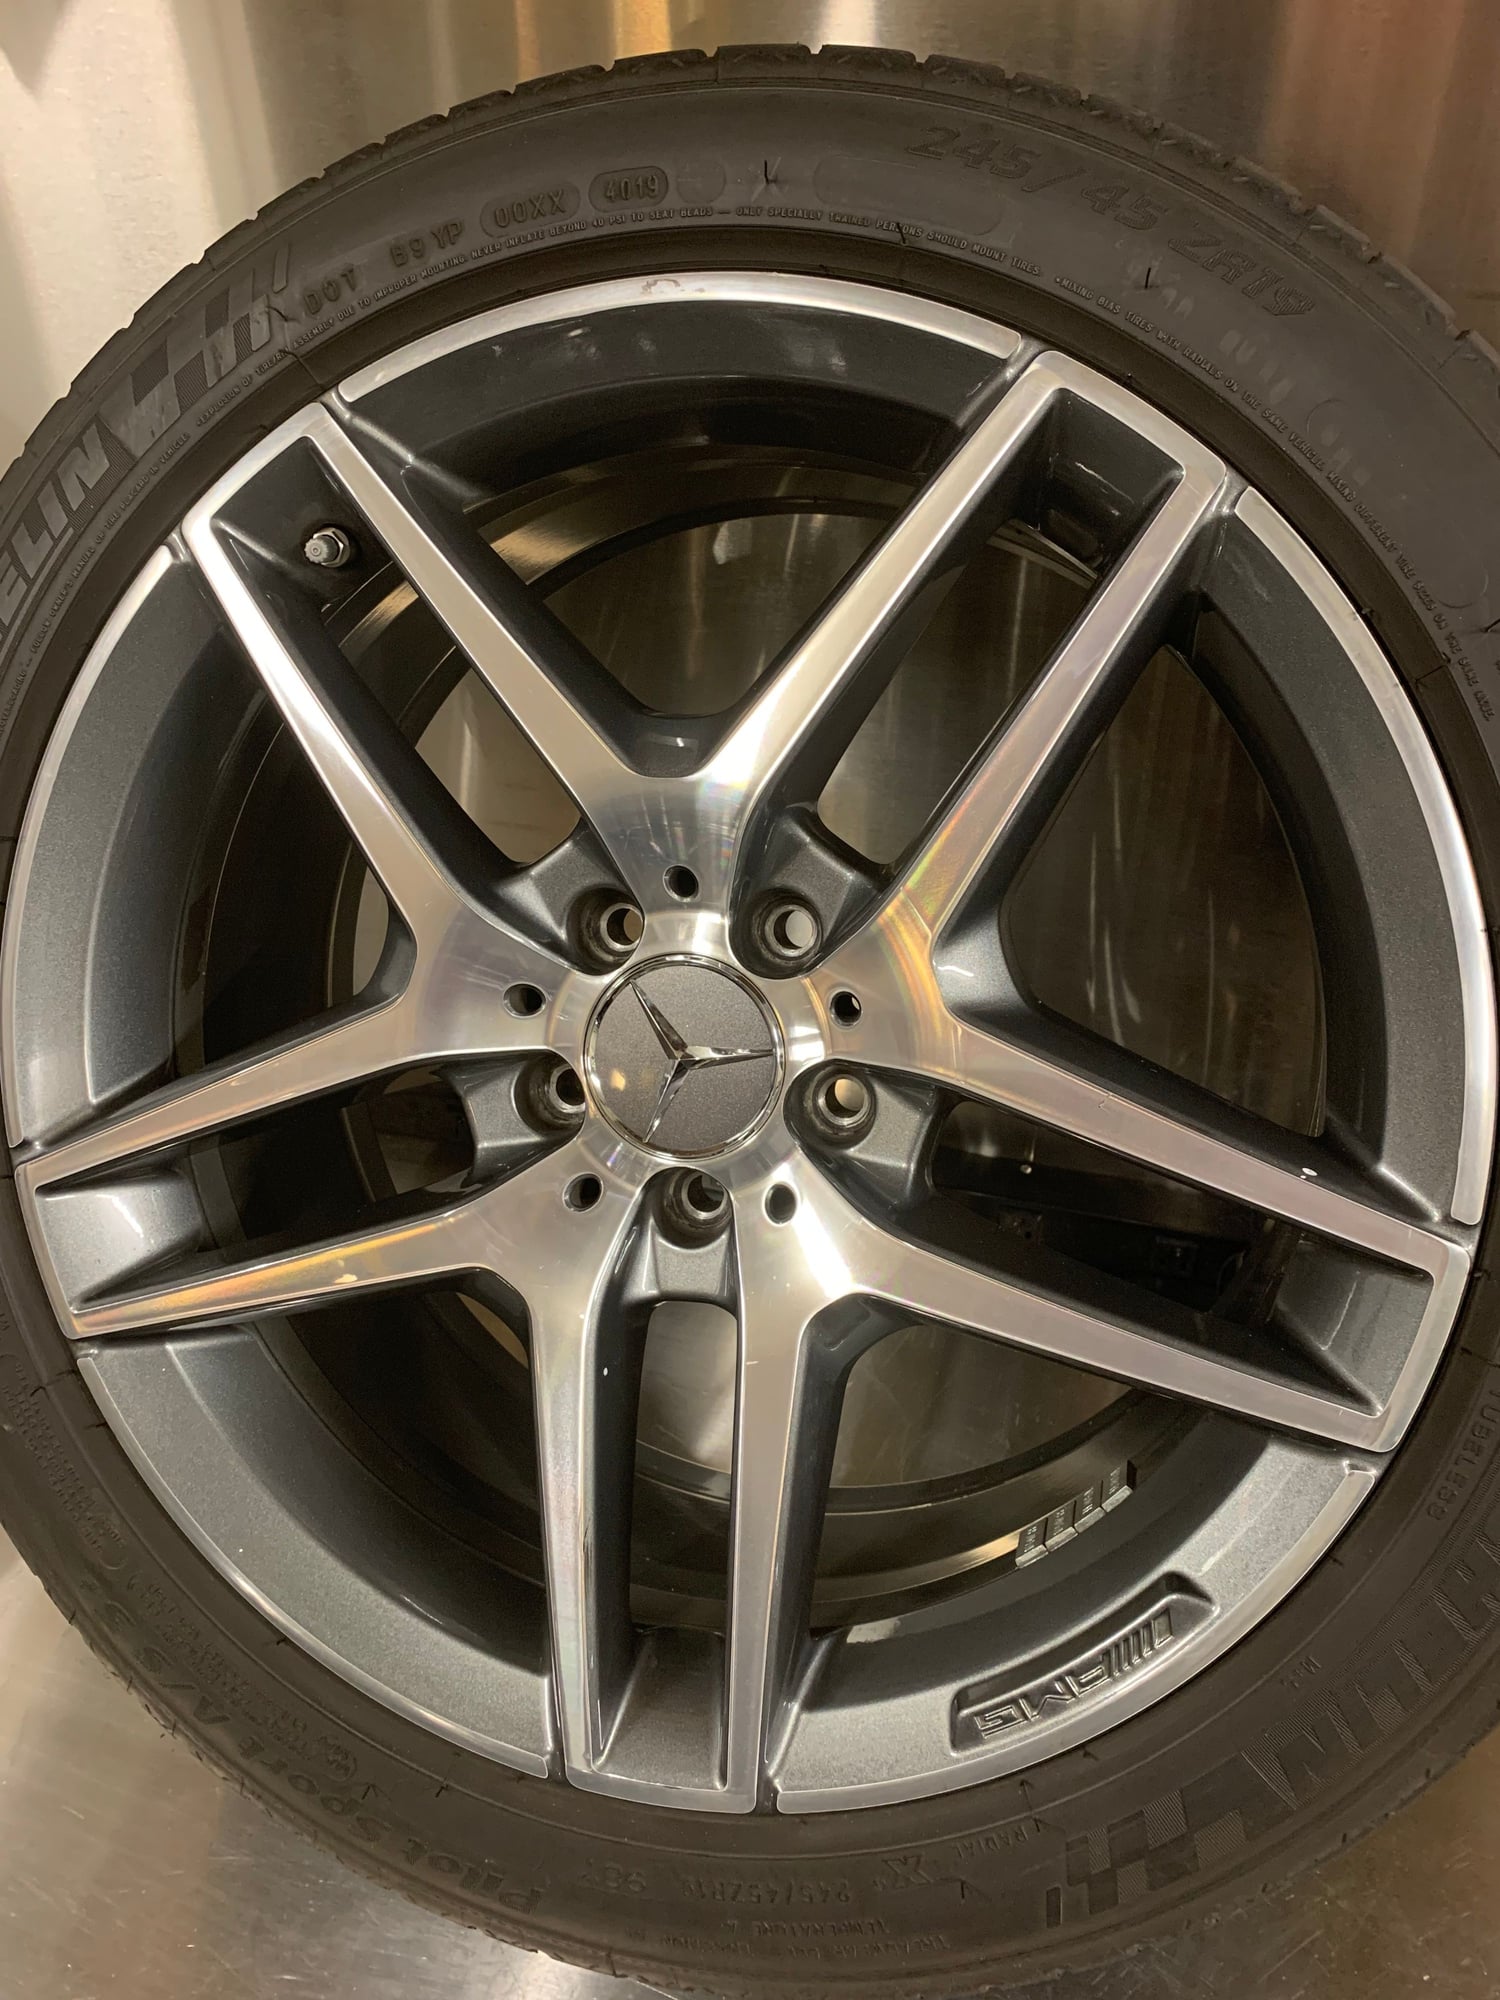 Wheels and Tires/Axles - 2015 S550 AMG Sport Rims and Tires 19" Staggered Setup with newer tires - Used - All Years Mercedes-Benz All Models - Newcastle, WA 98059, United States